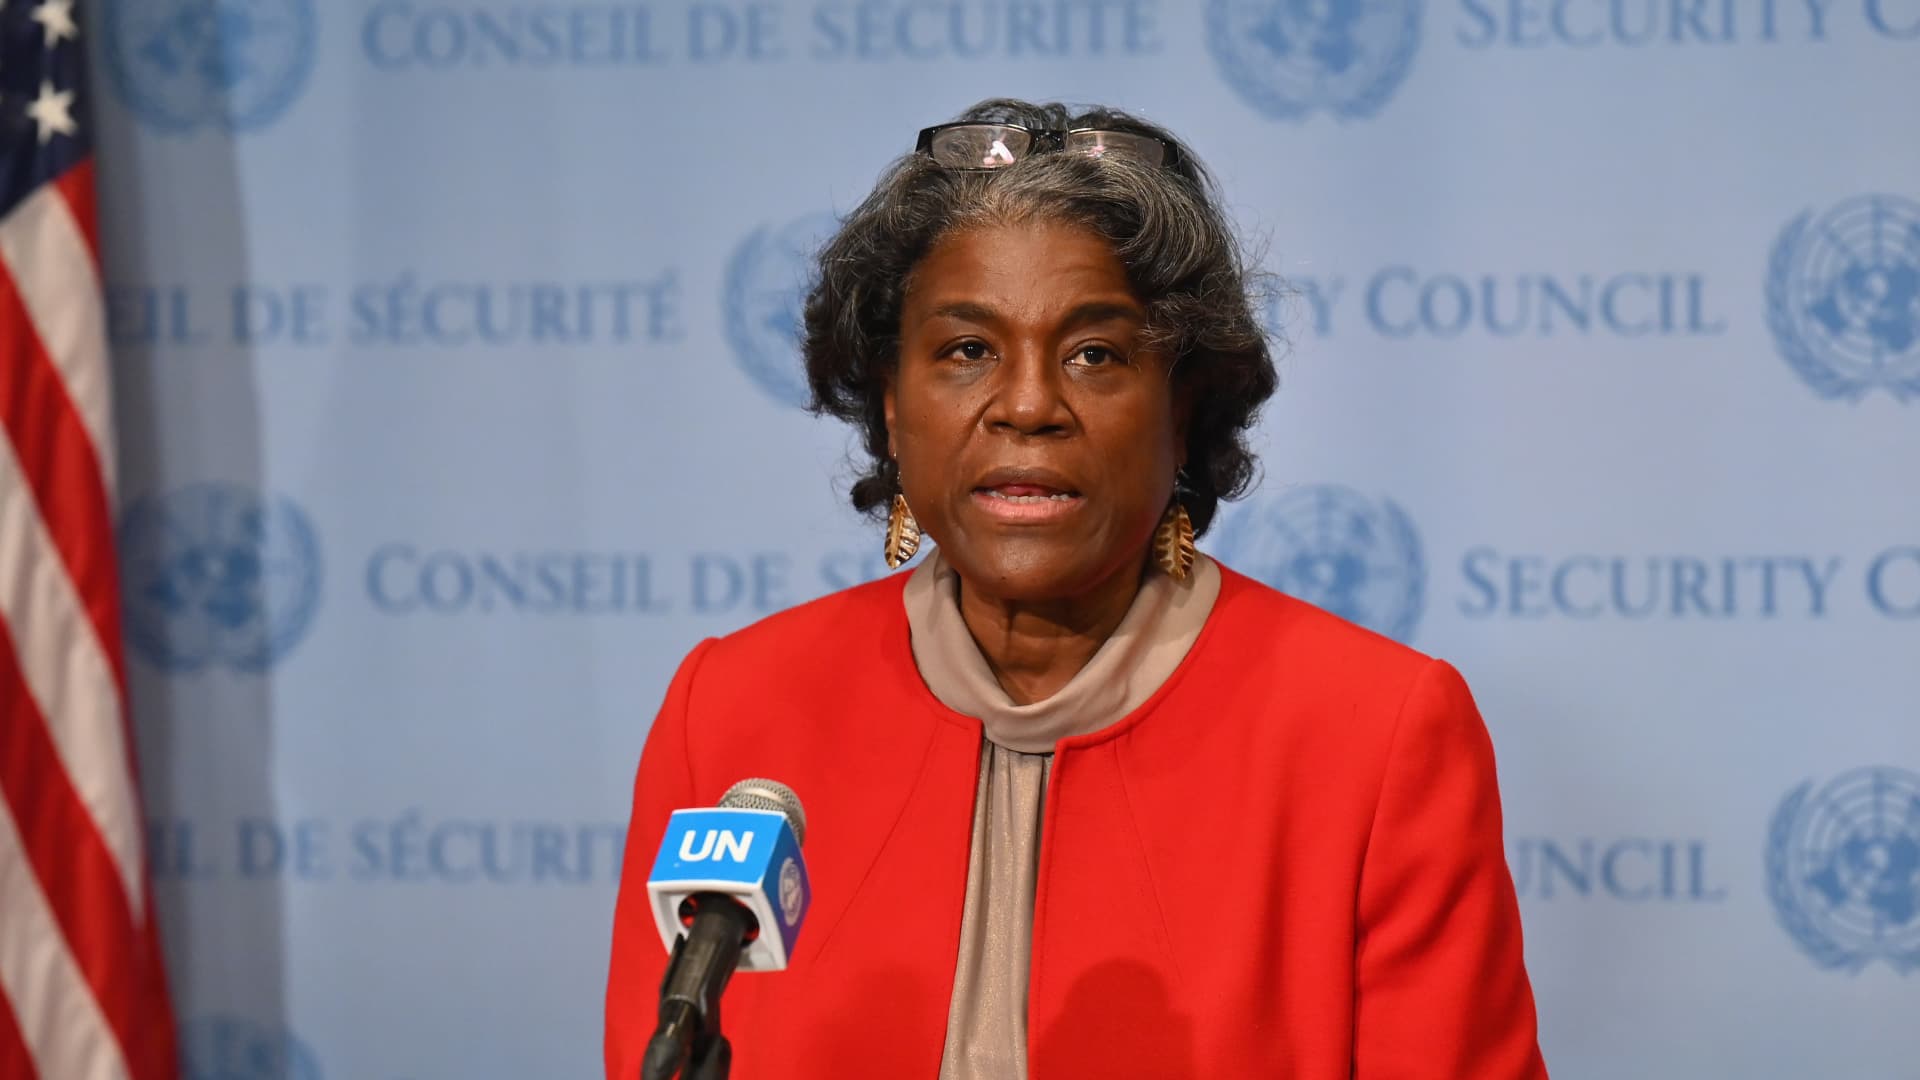 New US Ambassador to the United Nations, Linda Thomas-Greenfield speaks after meeting with UN Secretary-General Antonio Guterres at the United Nations on February 25, 2021 in New York City.